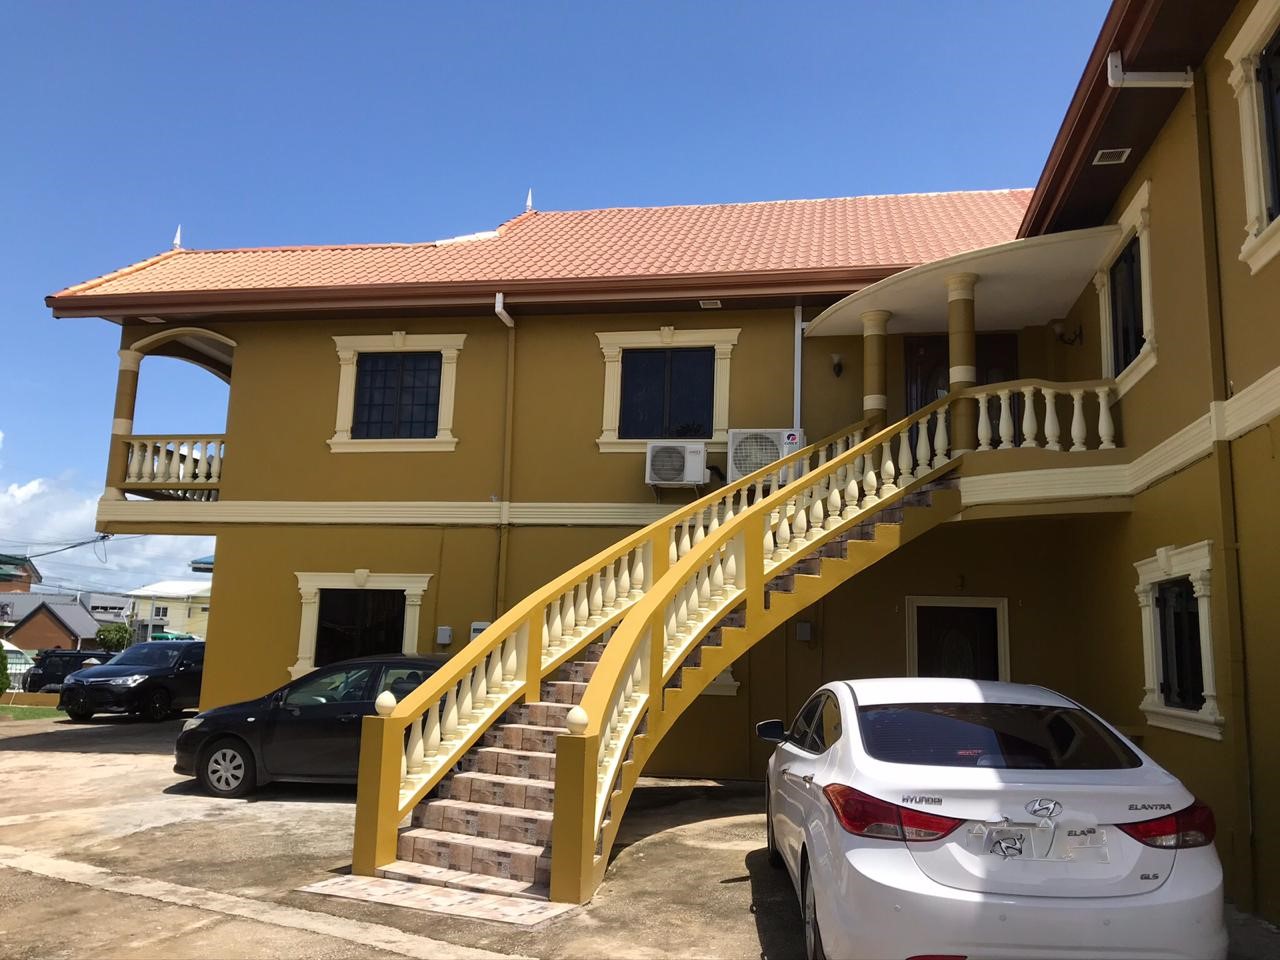 New Apartment For Rent In Trincity for Small Space